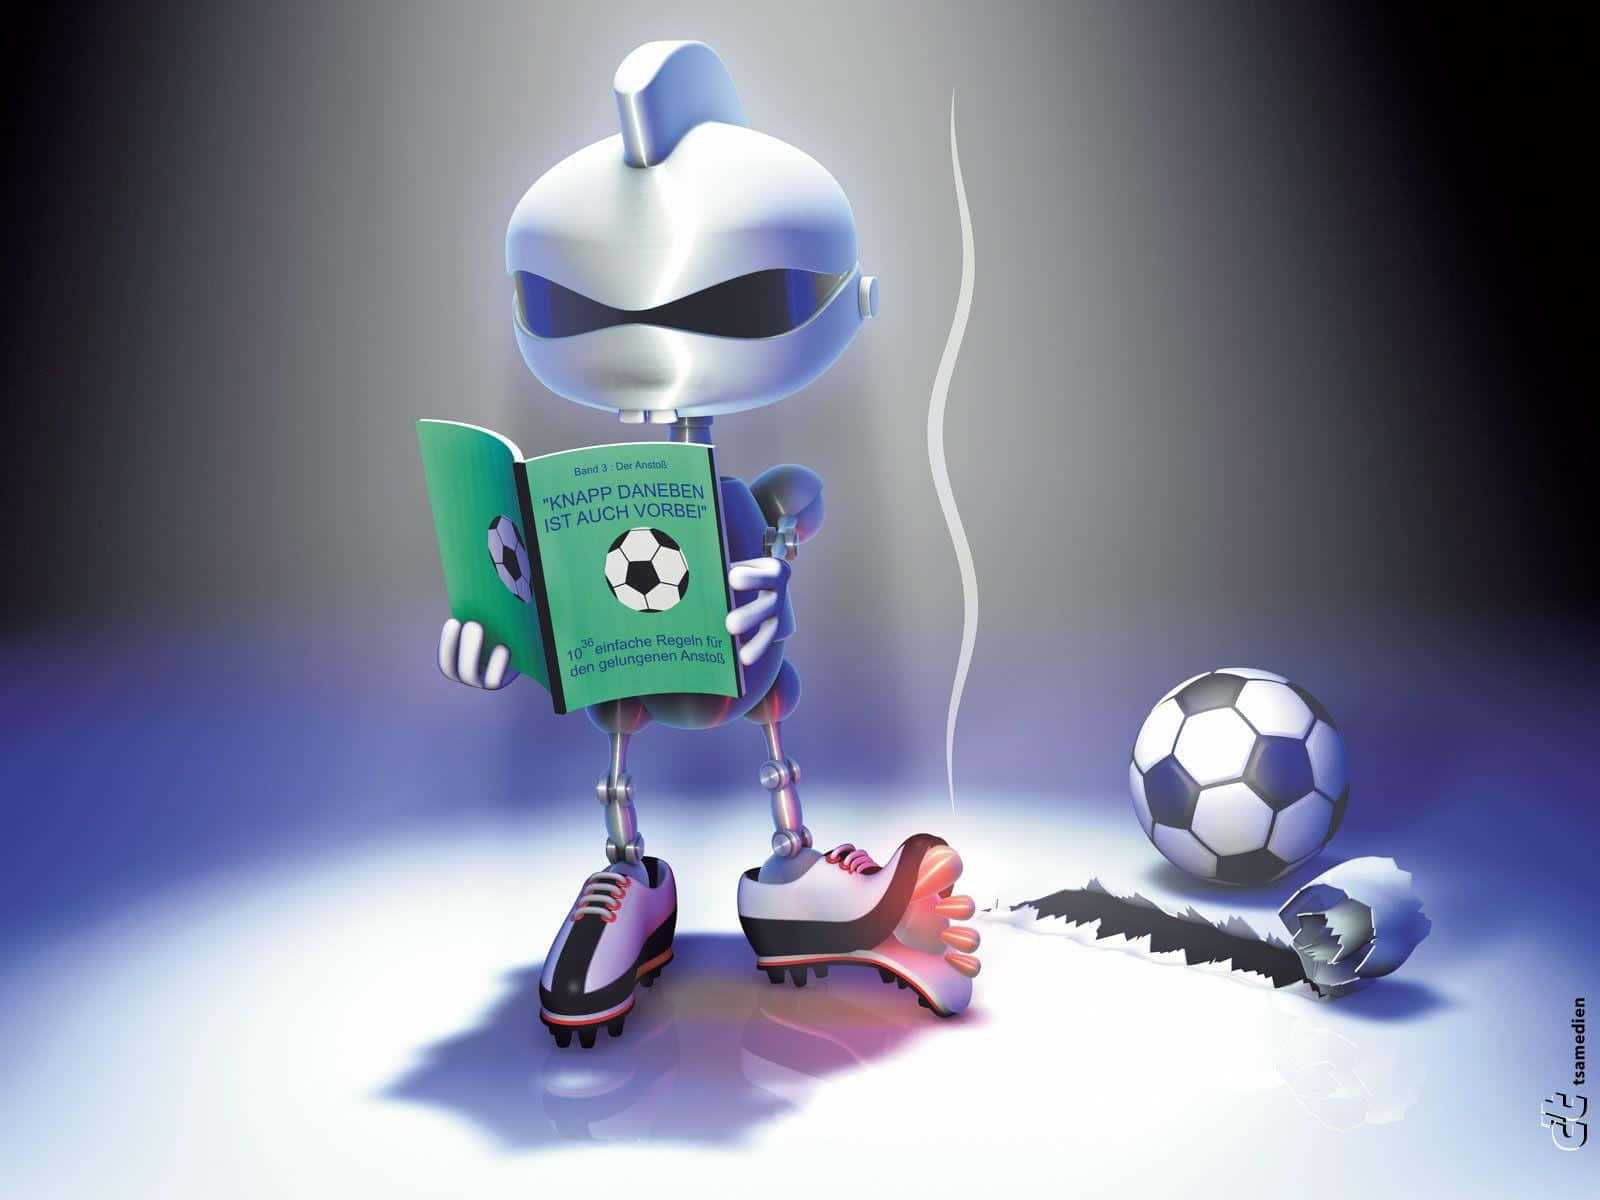 A Robot Is Holding A Book And A Soccer Ball